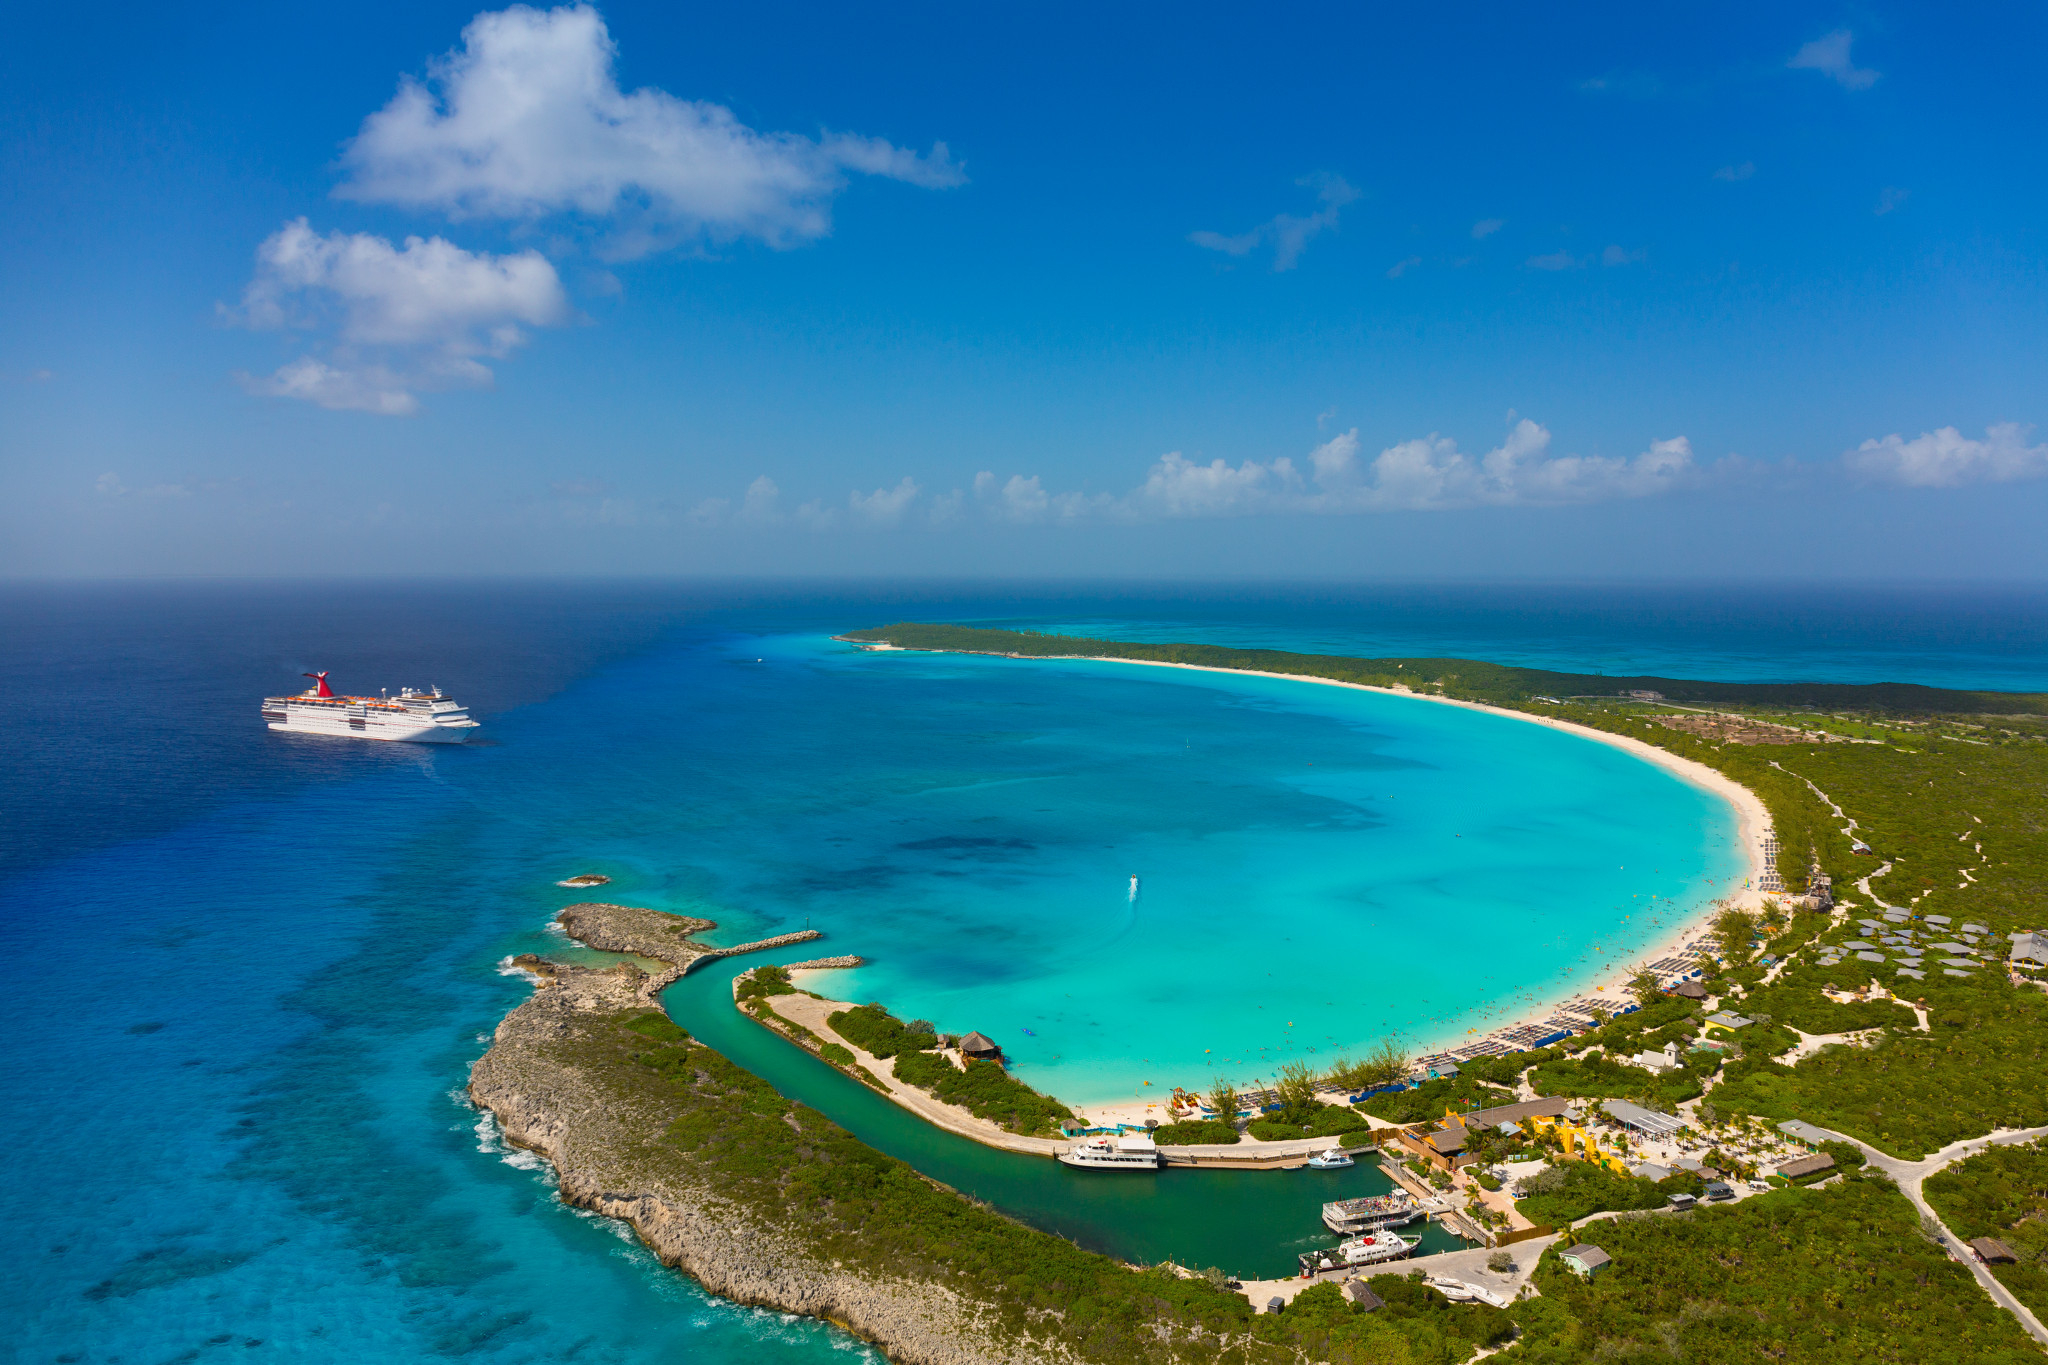 Cruise Destination Guides – Guide to Carnival Cruise Line’s Private Bahamas Island Half Moon Cay